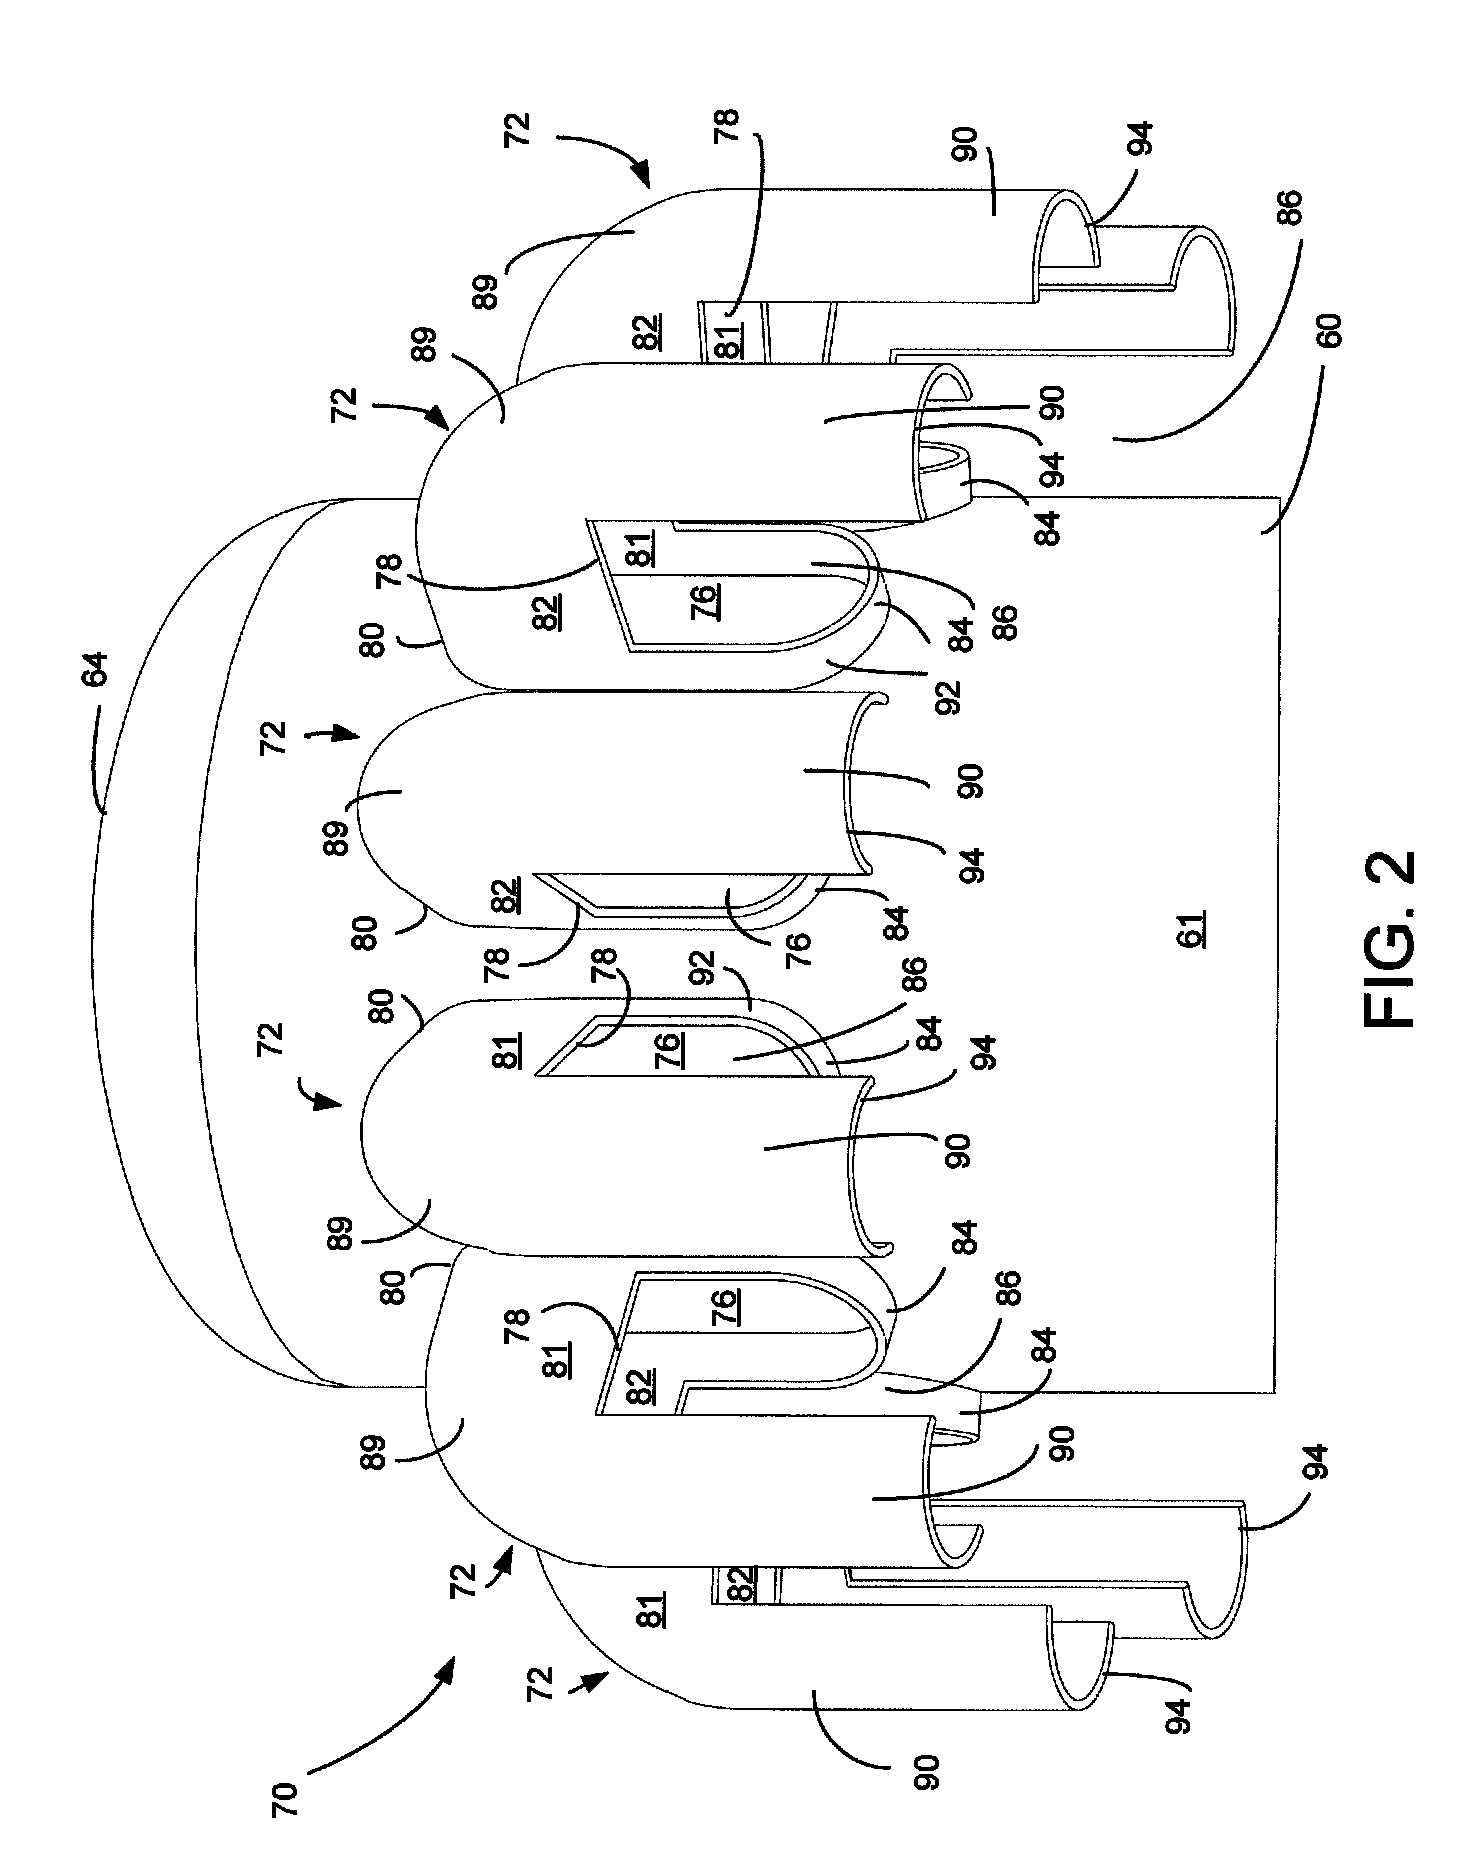 Apparatus and process for regenerating catalyst